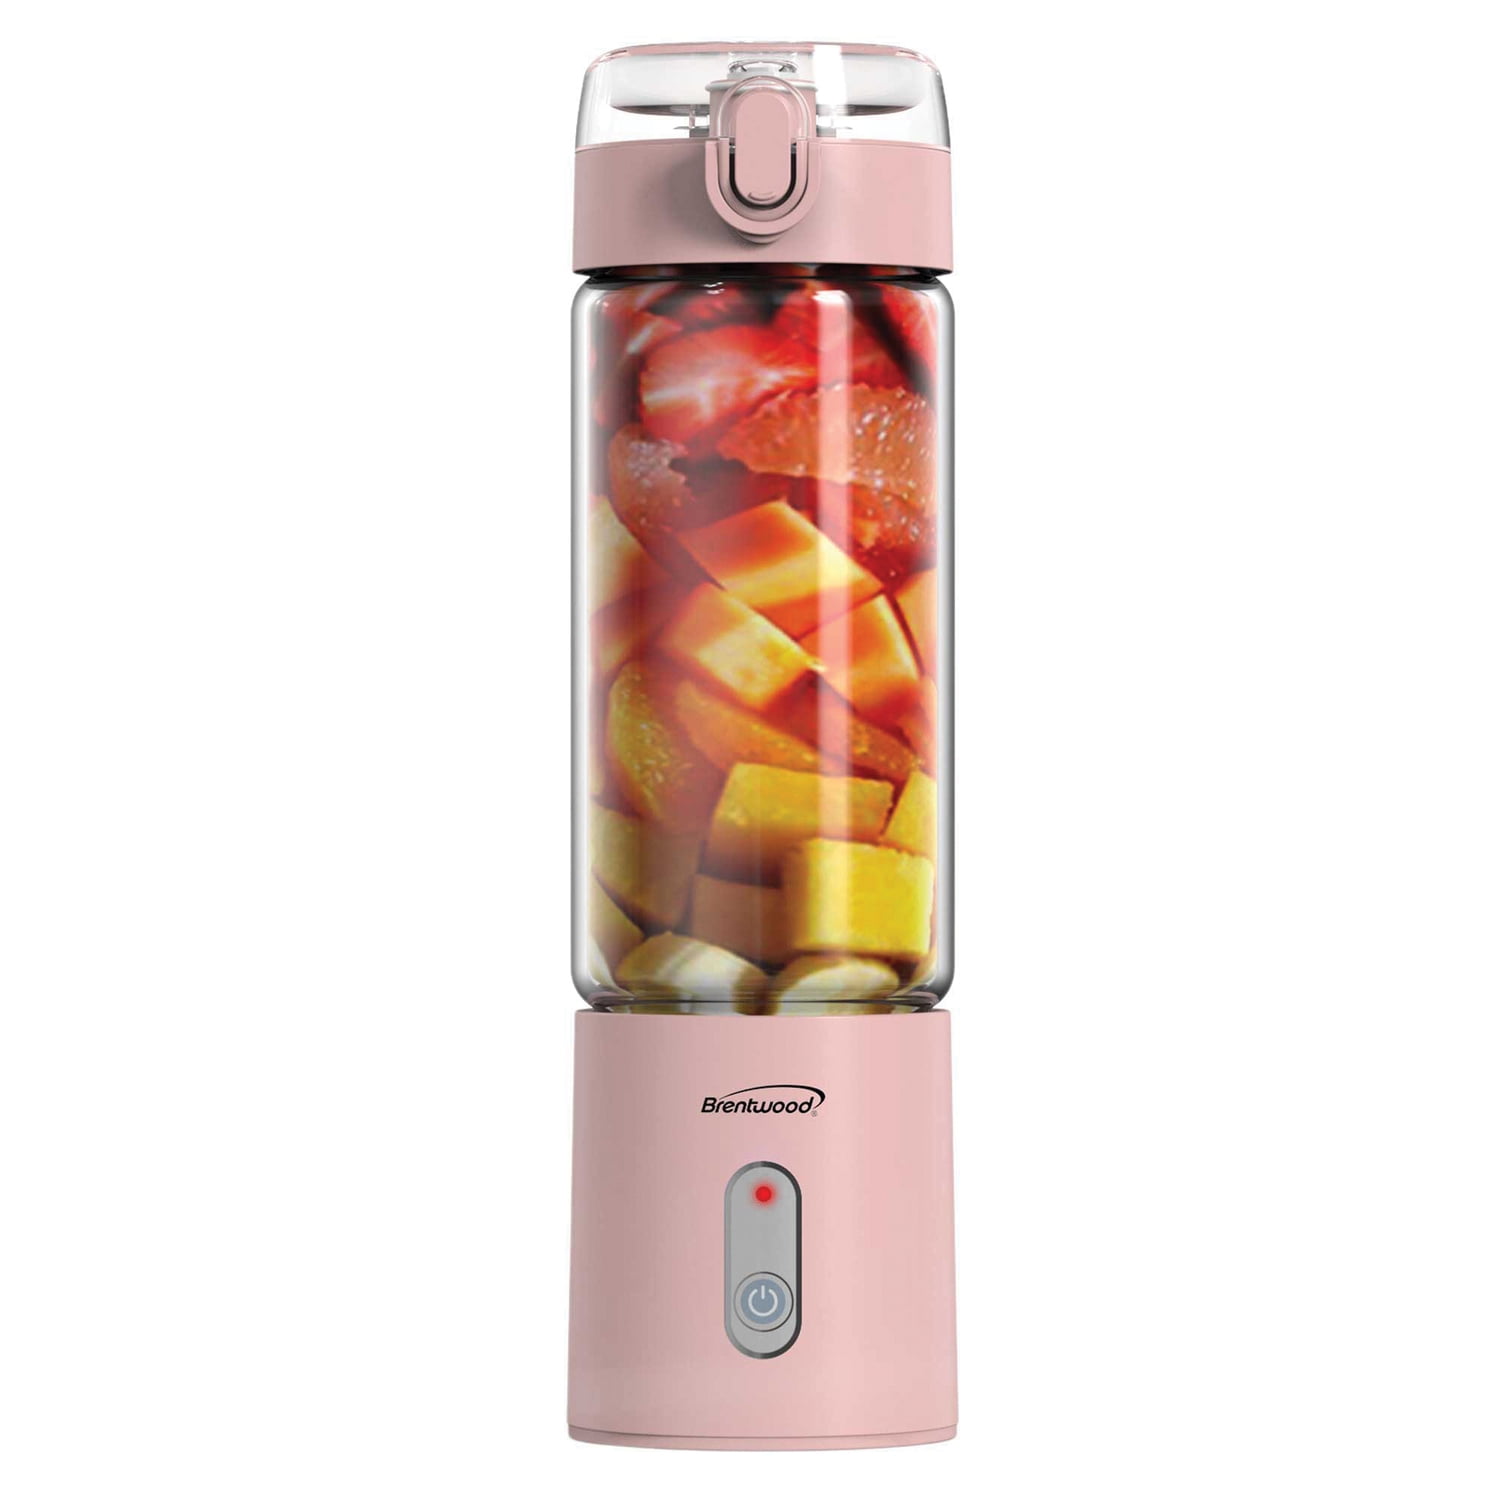 Brentwood 50-Watt 17-oz. Portable Battery-Operated USB-Chargeable Glass Blender (Pink), Rjb-100pk